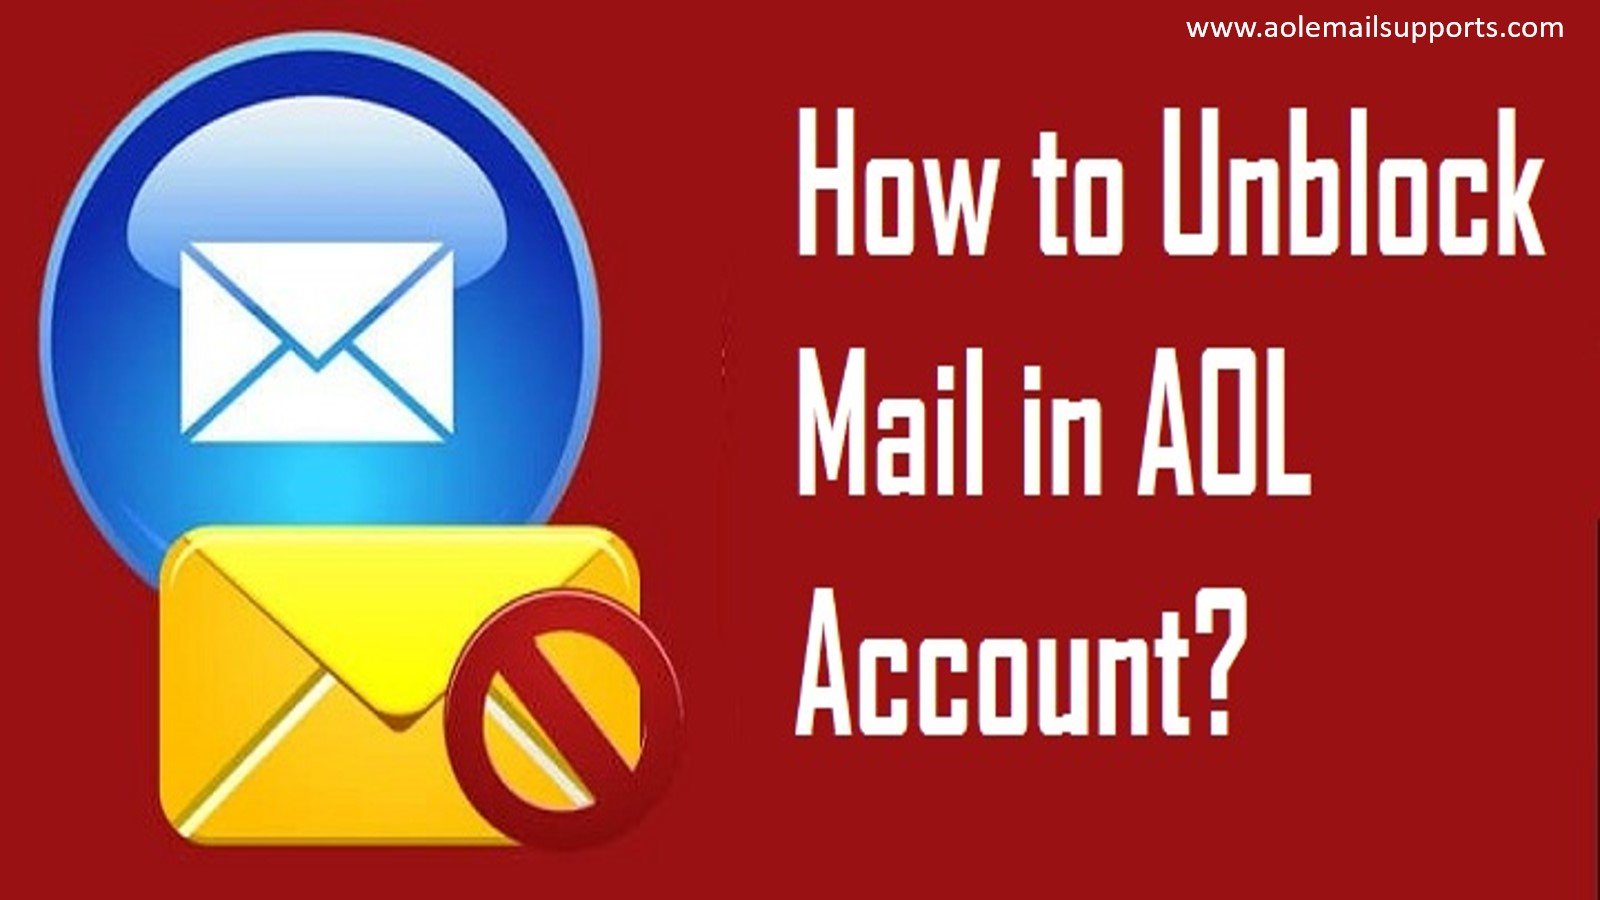 HOW CAN UNBLOCK MAIL IN AOL EMAIL ACCOUNT?